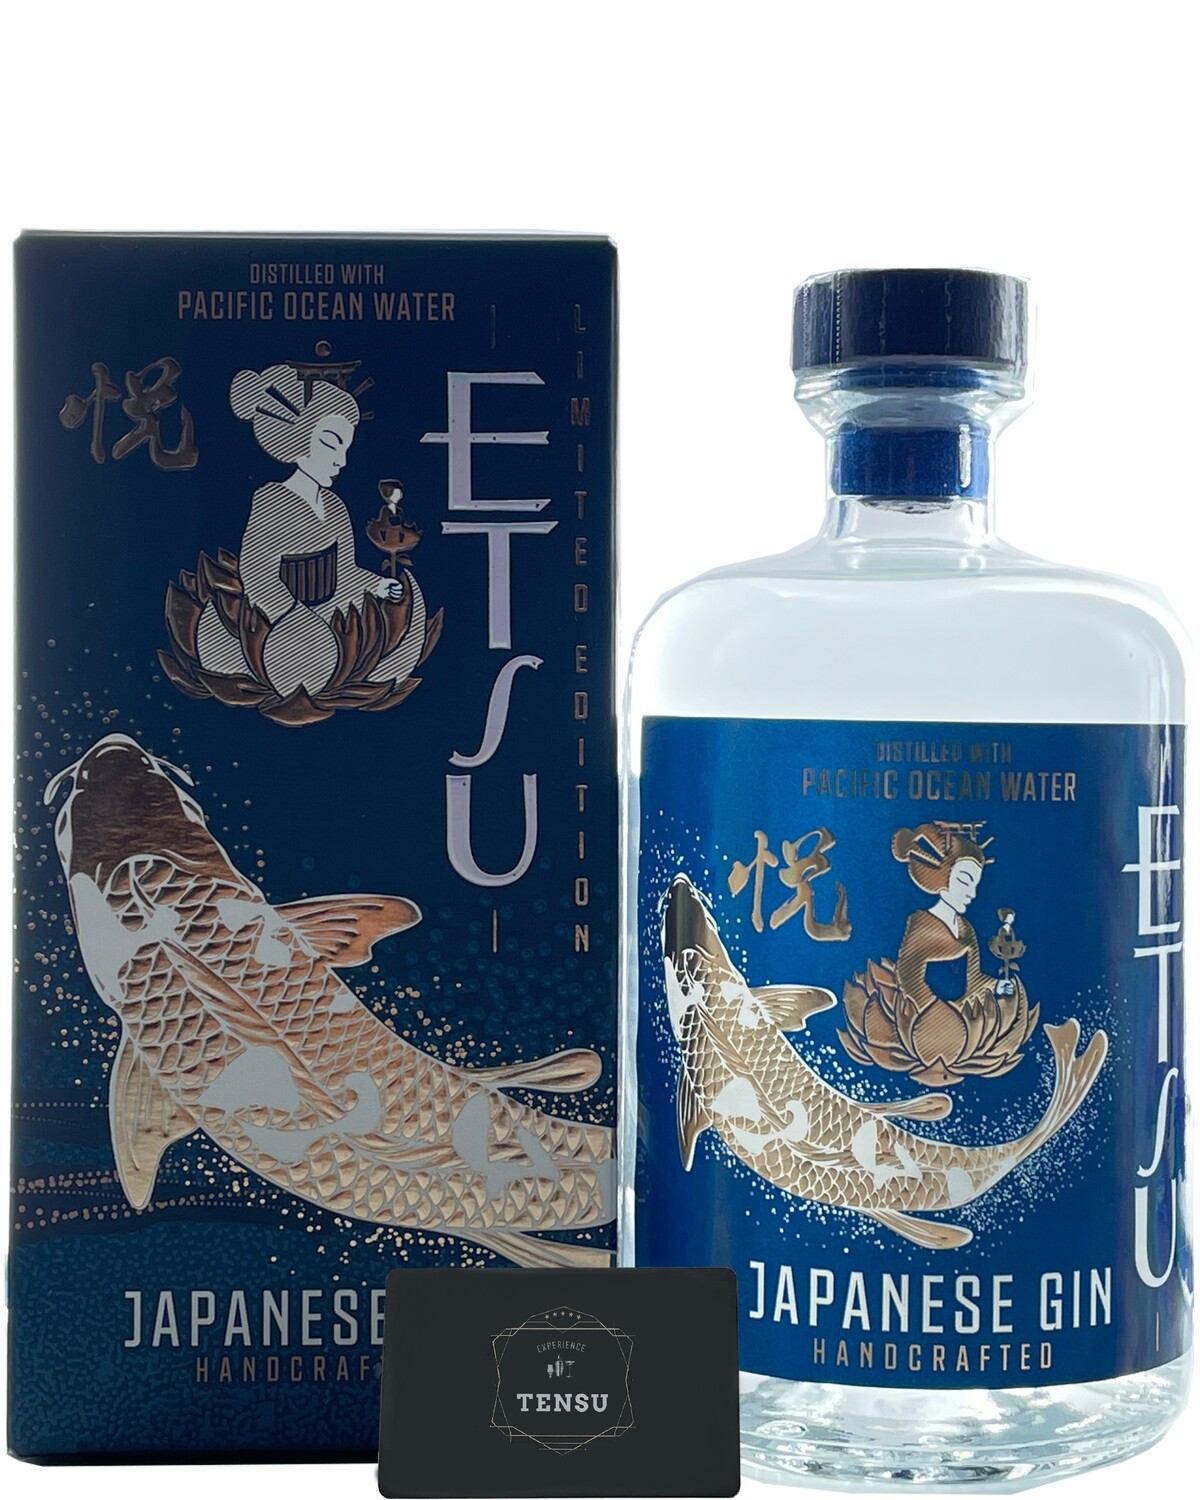 Etsu Gin (Pacific Ocean Water) Limited Edition 45,0 "OB"